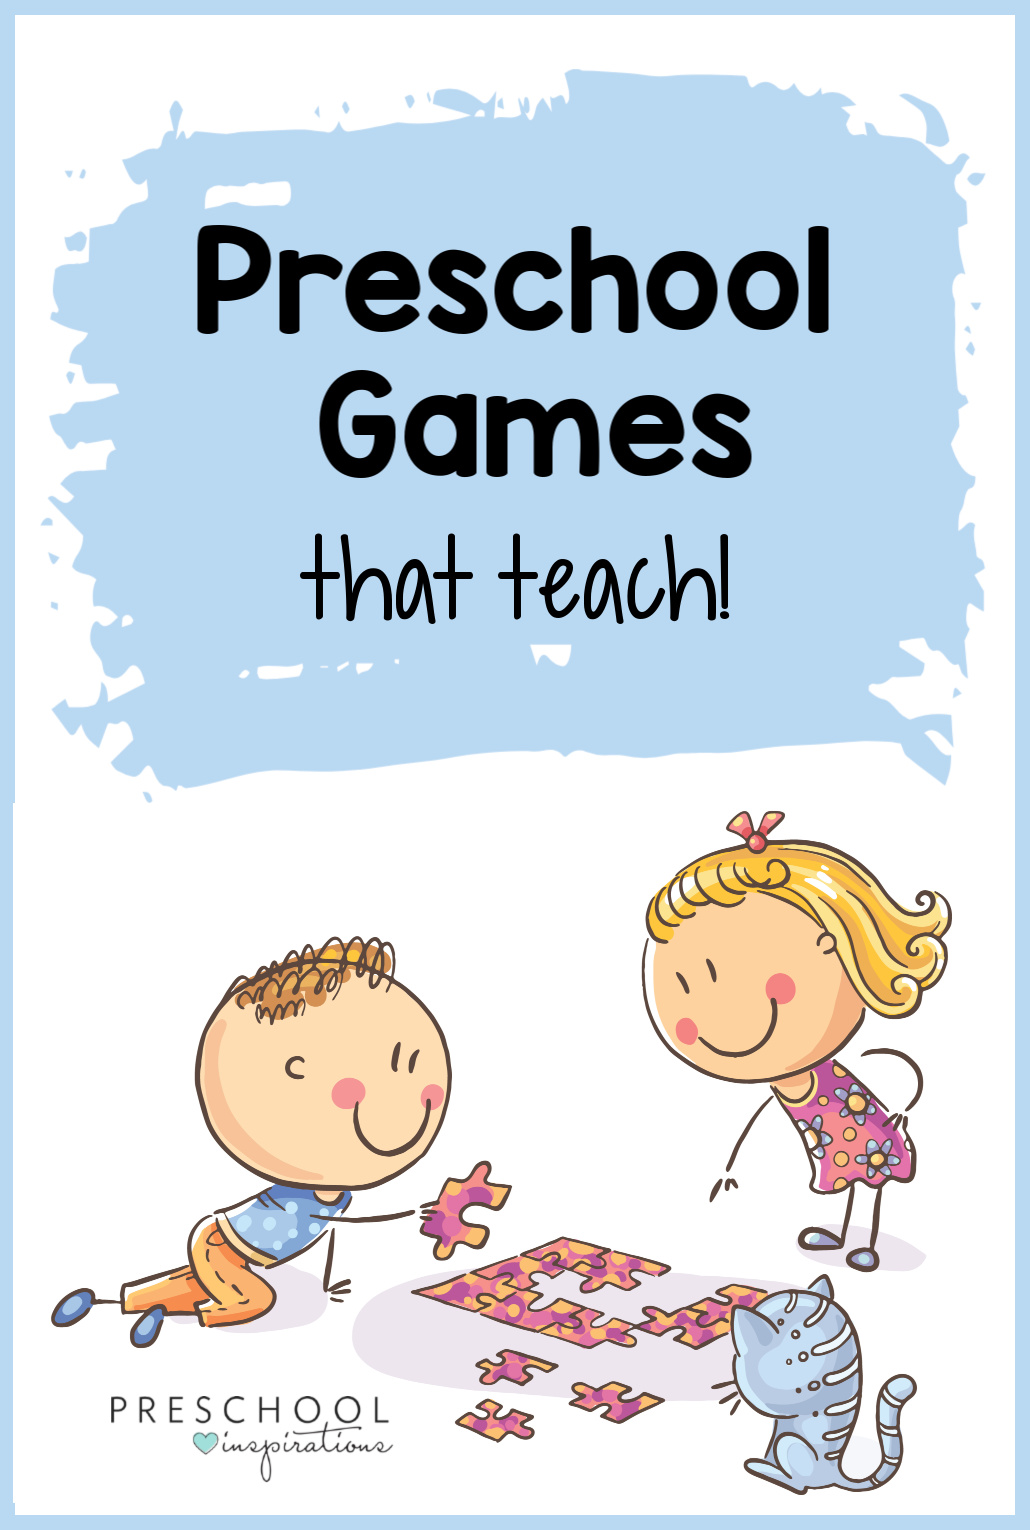 Games for preschool kids teach some great skills, but are also super FUN! These indoor group games are great for a classroom or at home with family. #preschool #preschoolgames #kidsactivities #playandlearn